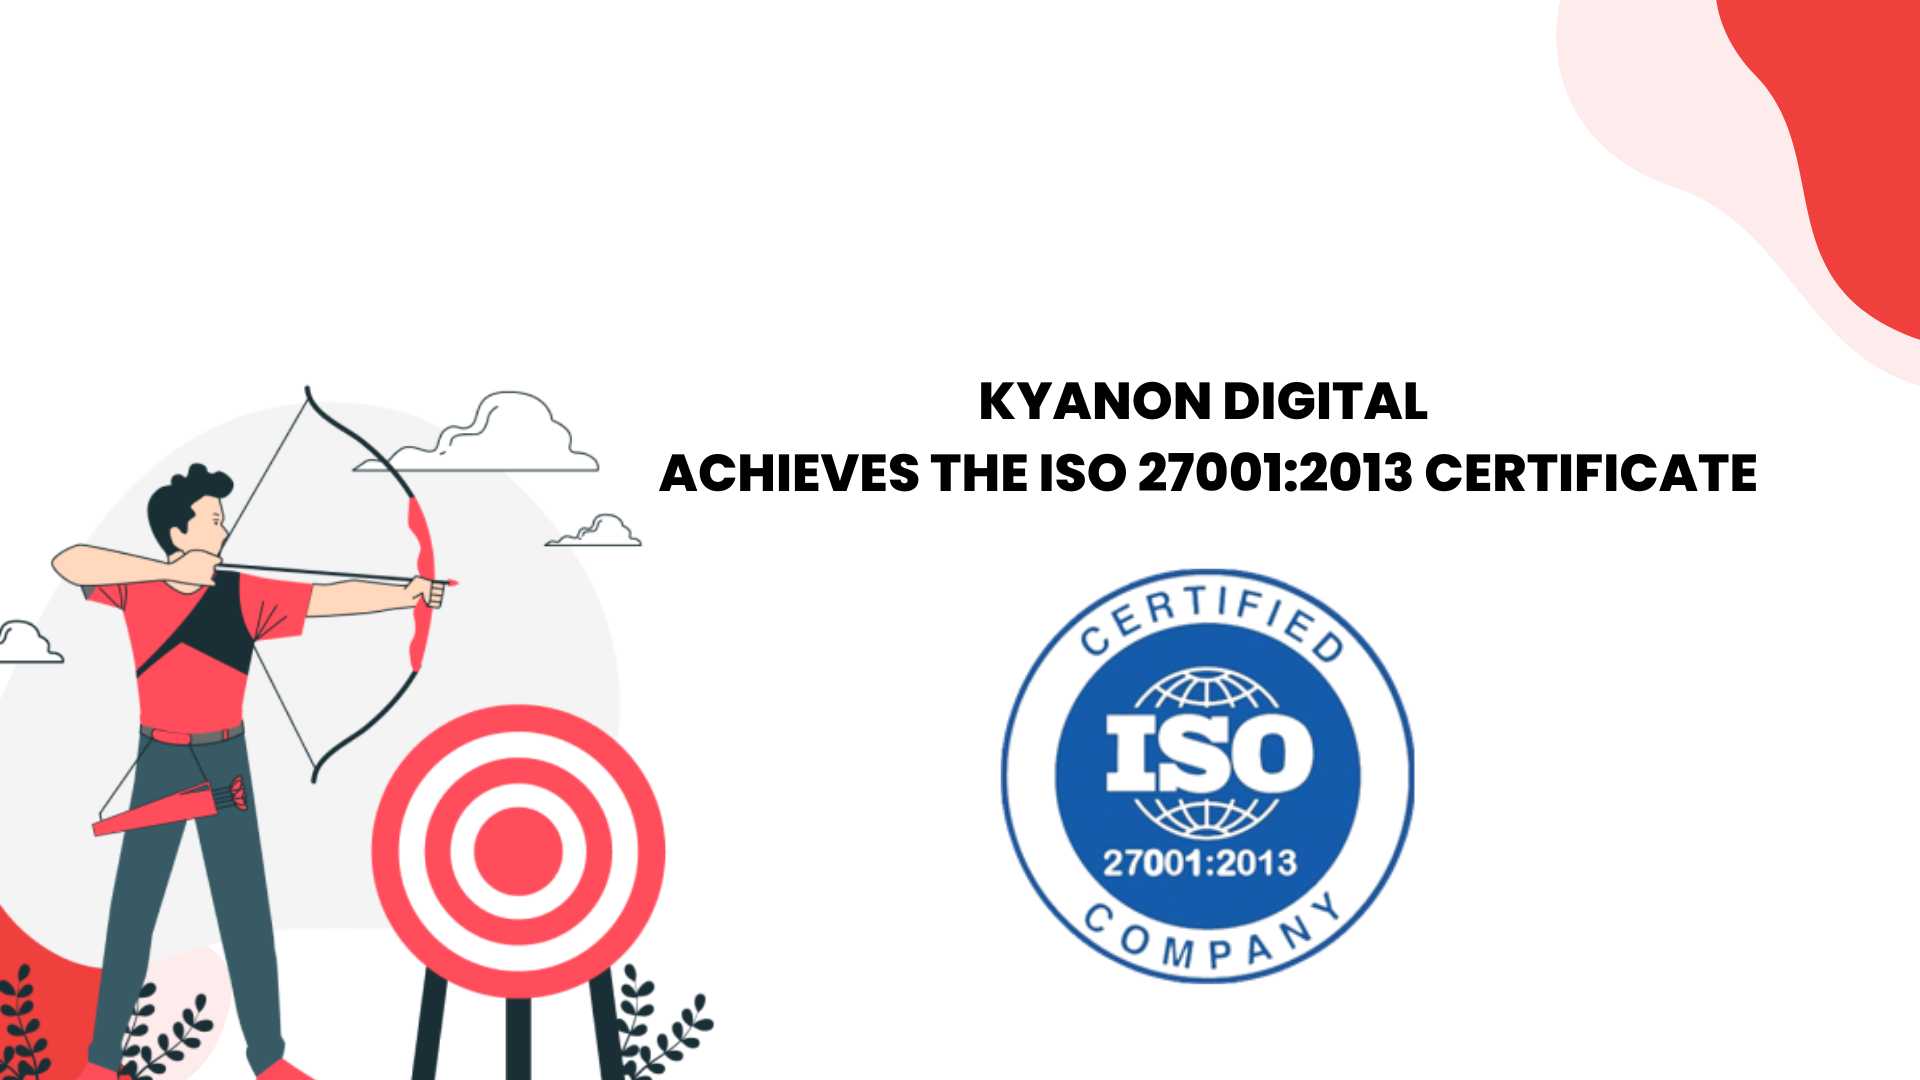 Kyanon Digital Achieves The ISO 27001:2013 Certificate 1